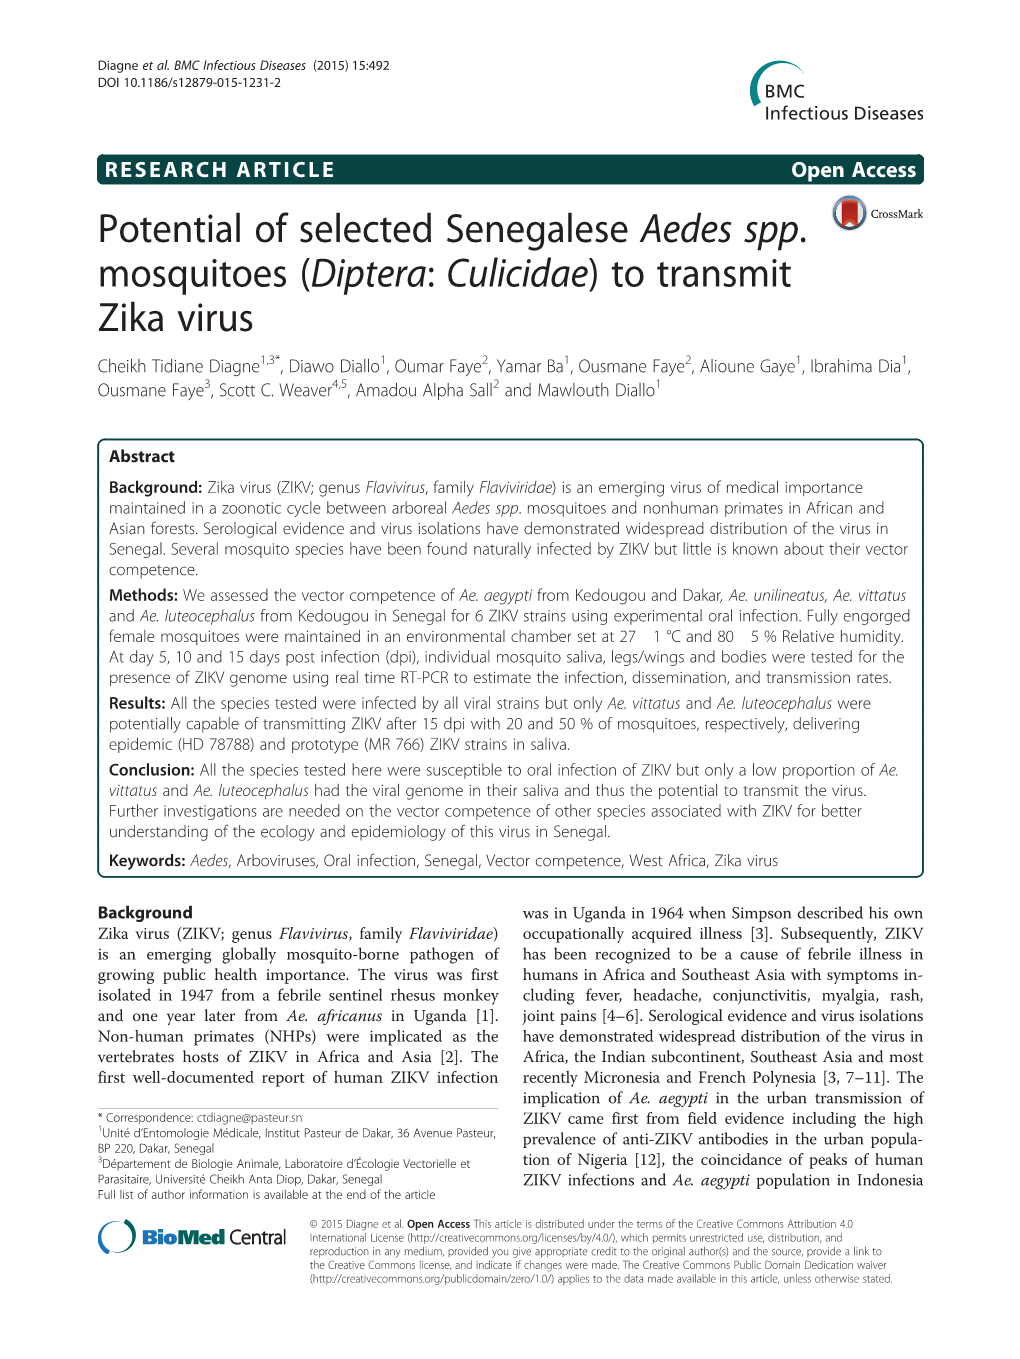 Potential of Selected Senegalese Aedes Spp. Mosquitoes